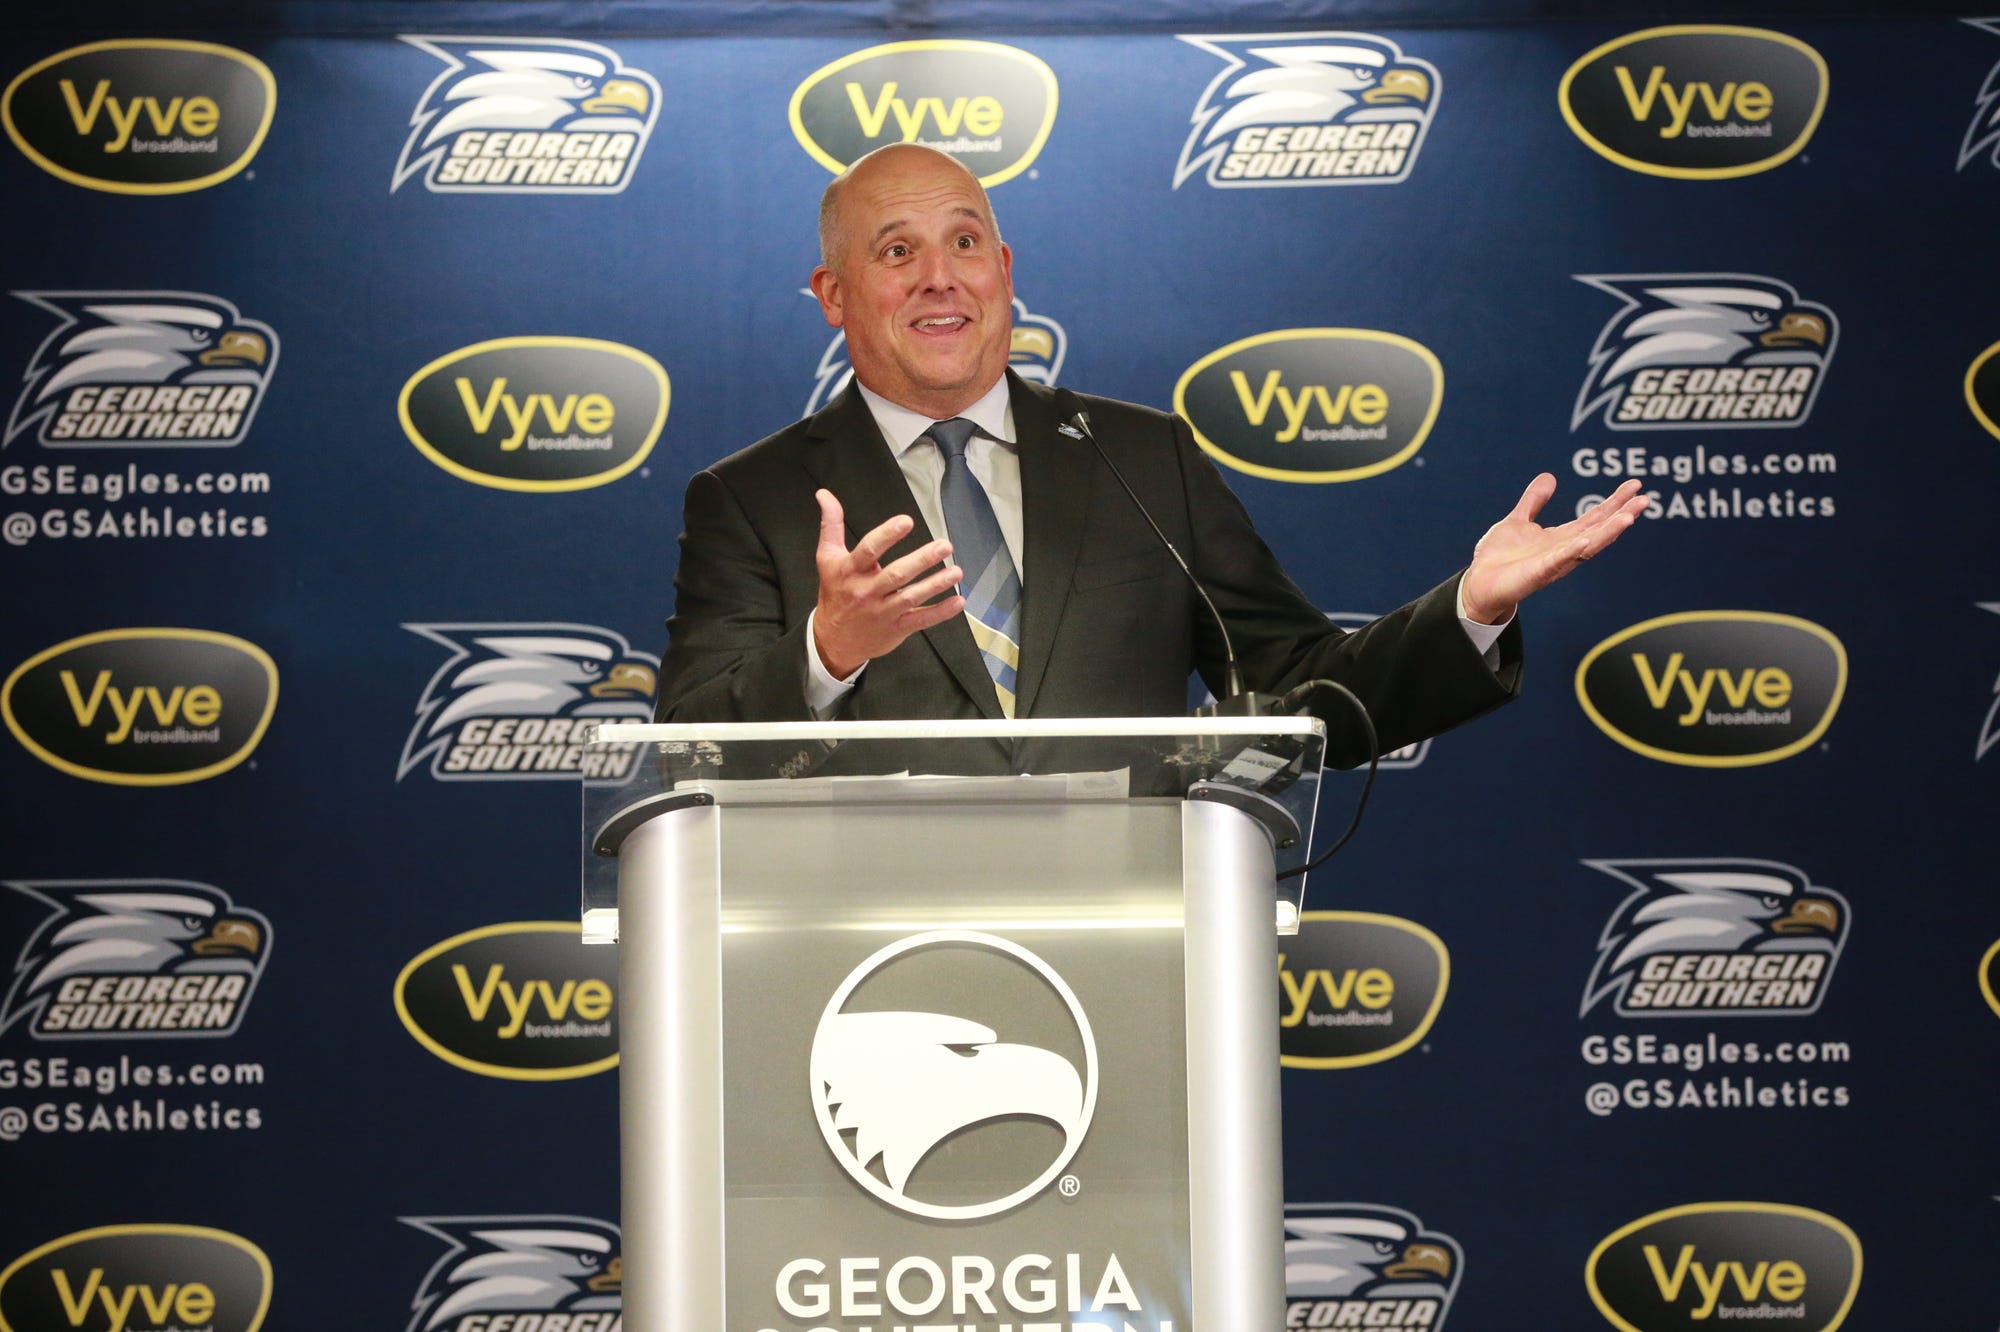 Georgia Southern Extra: Coaching changes a constant in college athletics